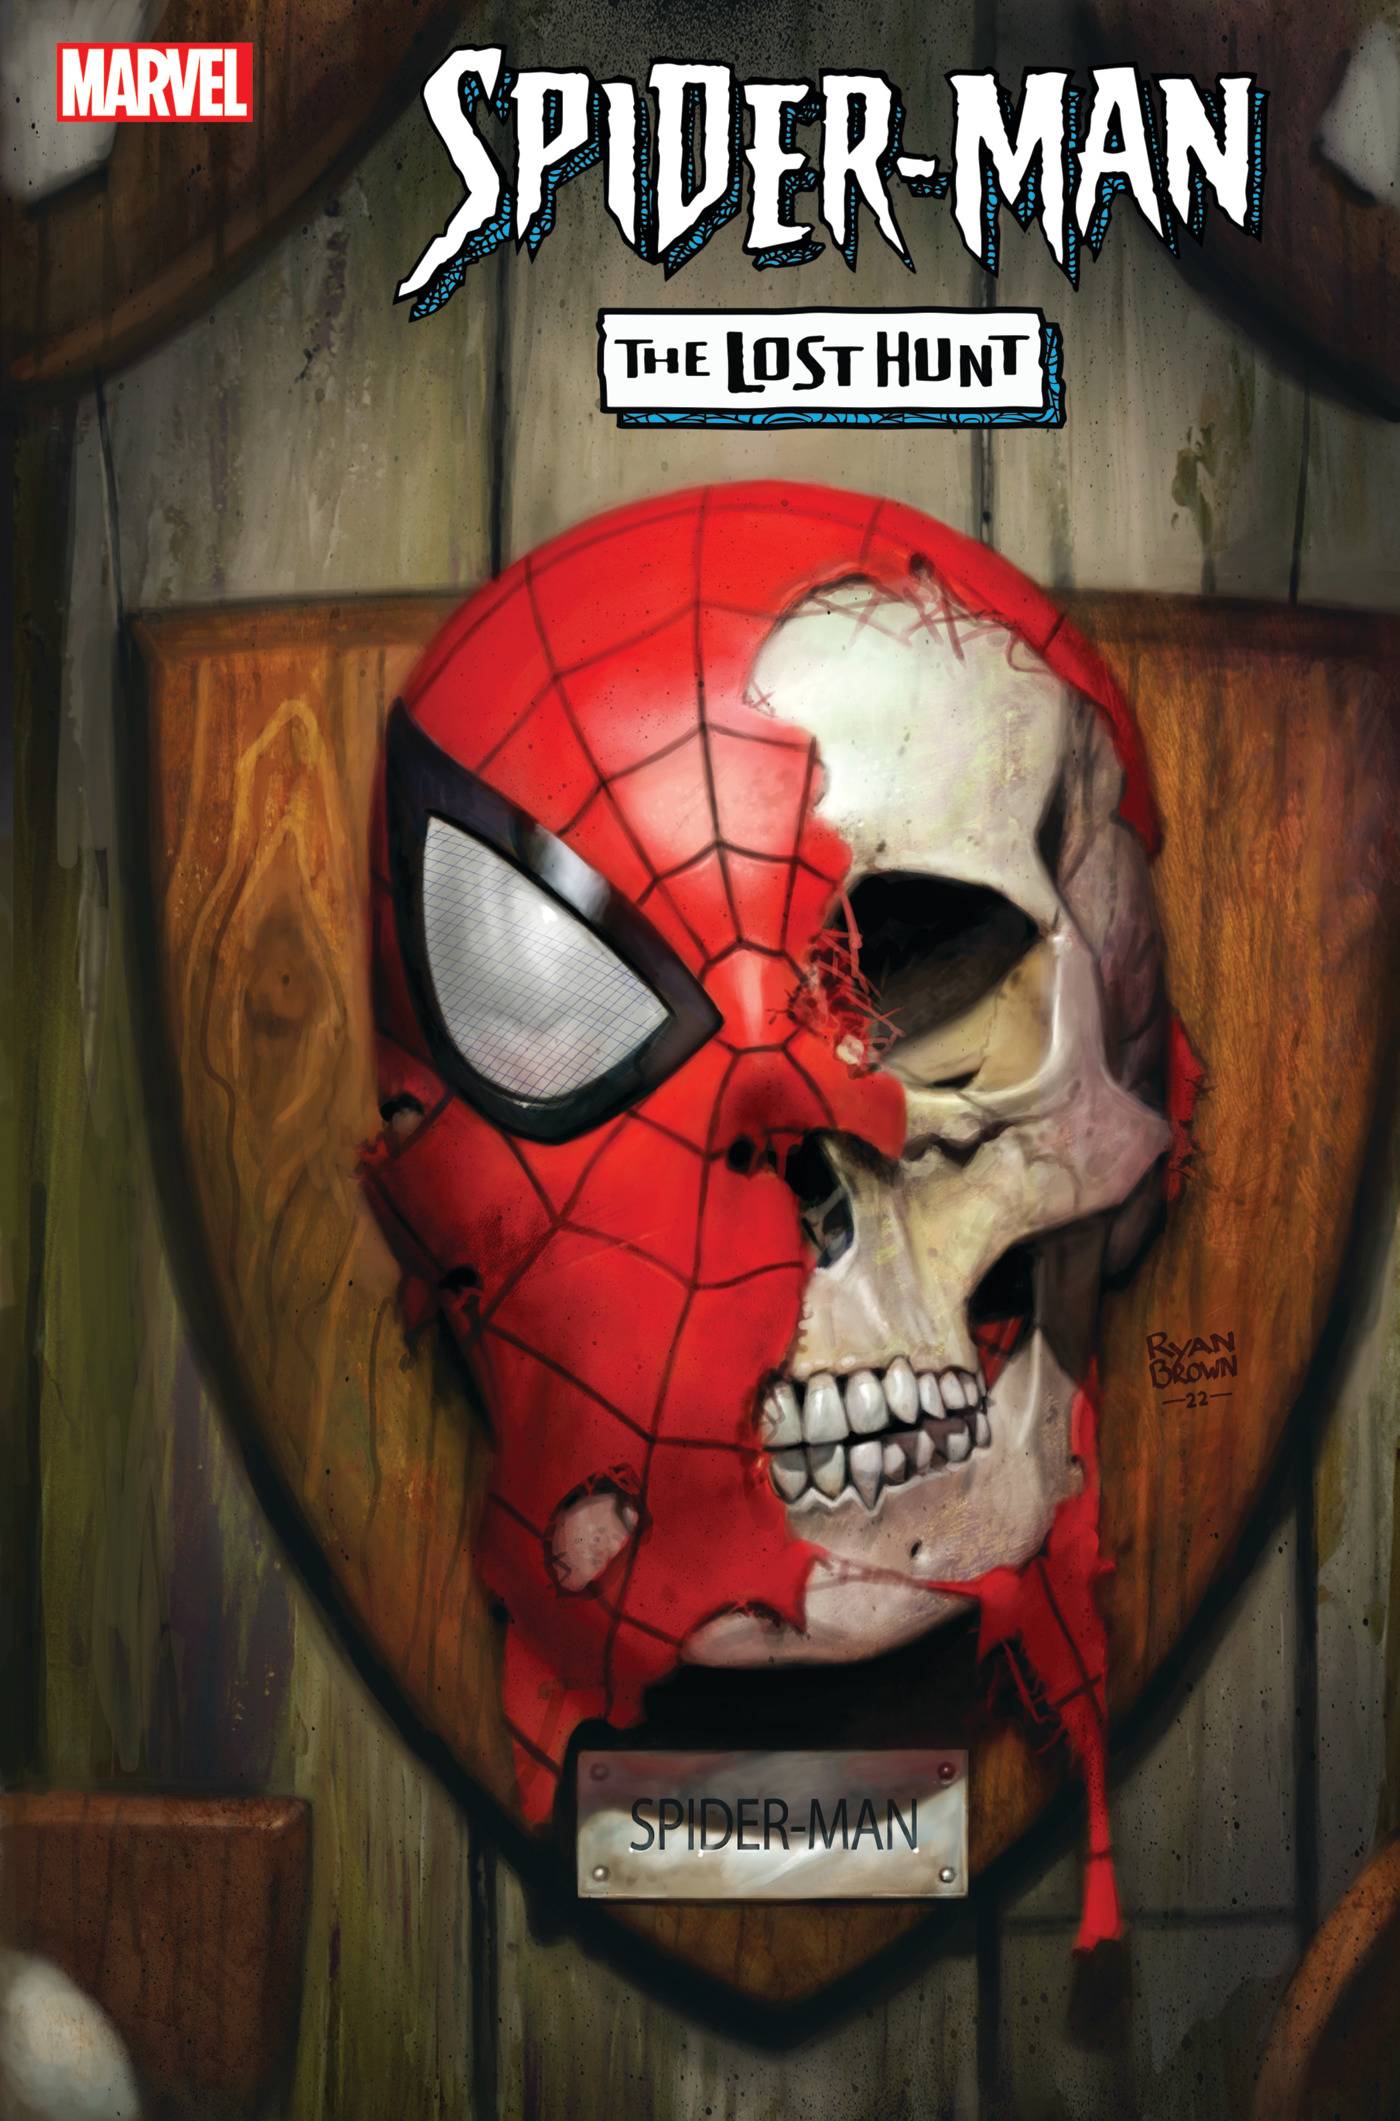 SPIDER-MAN LOST HUNT #2 (OF 5) - King Gaming 